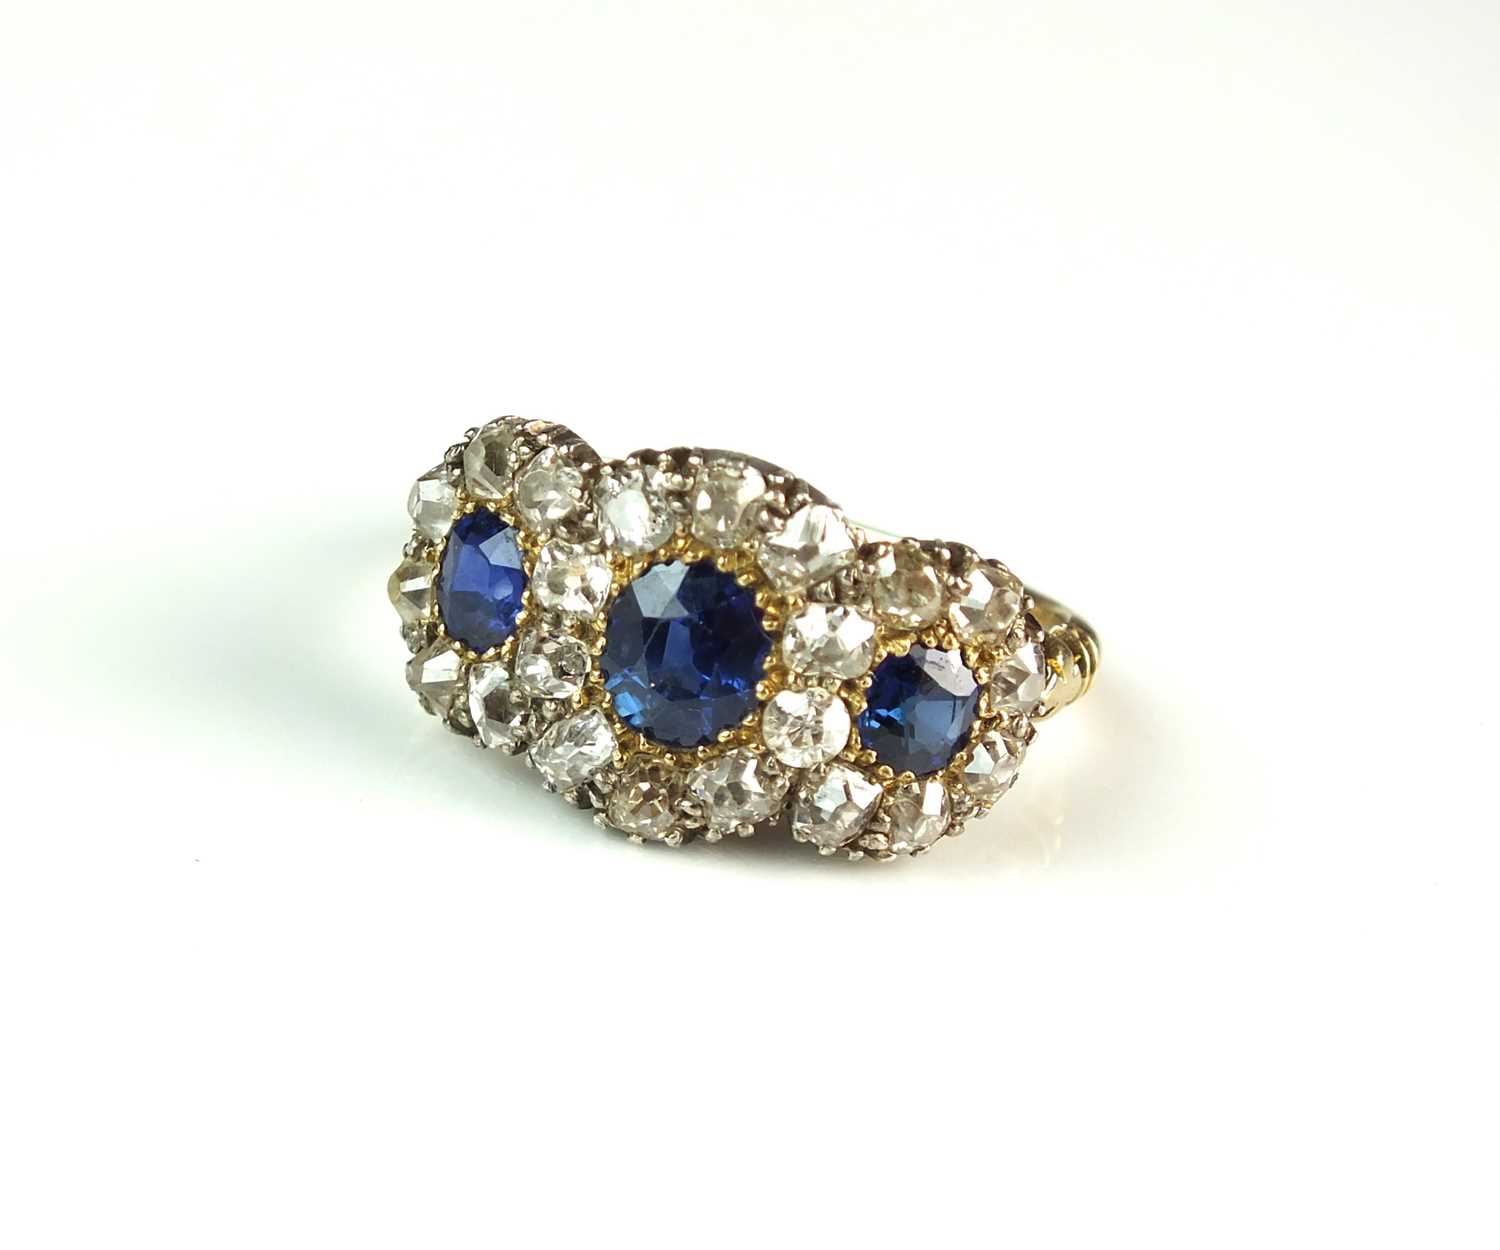 57 - A 19th century sapphire and diamond ring